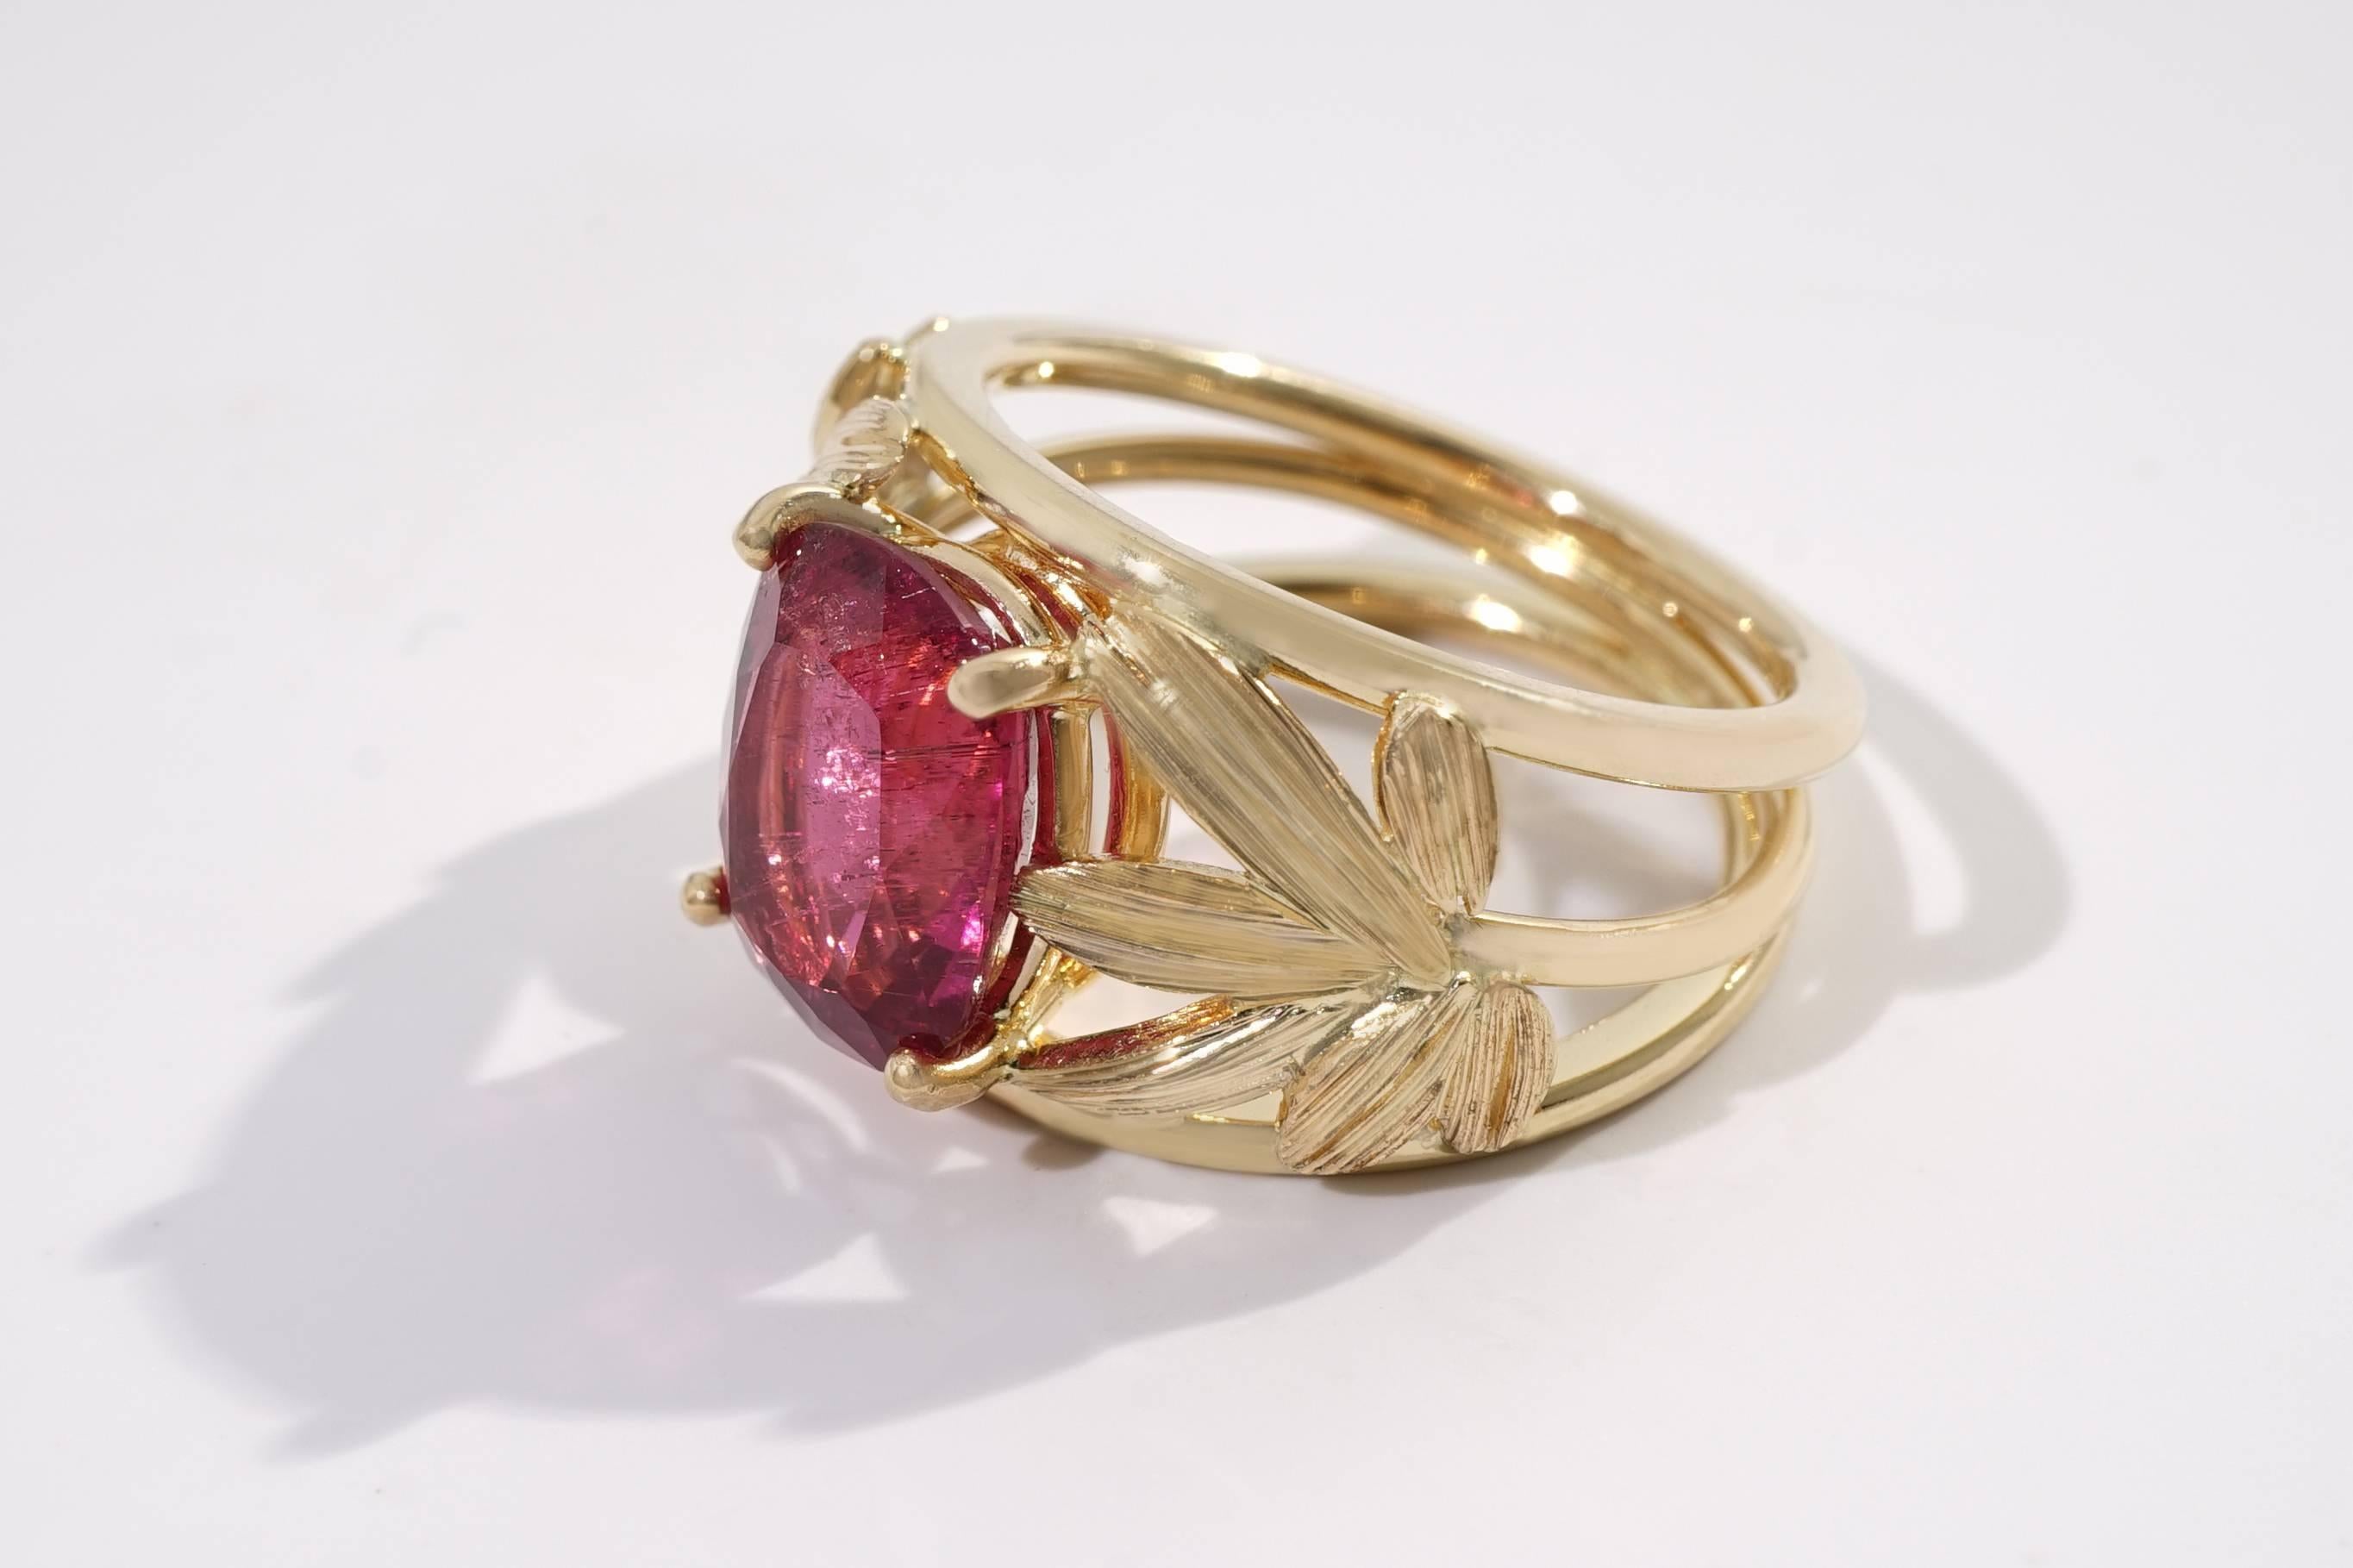 Contemporary Coralie Van Caloen Yellow Gold 18 Carat Palm Leaves And Pink Rubellite Band Ring